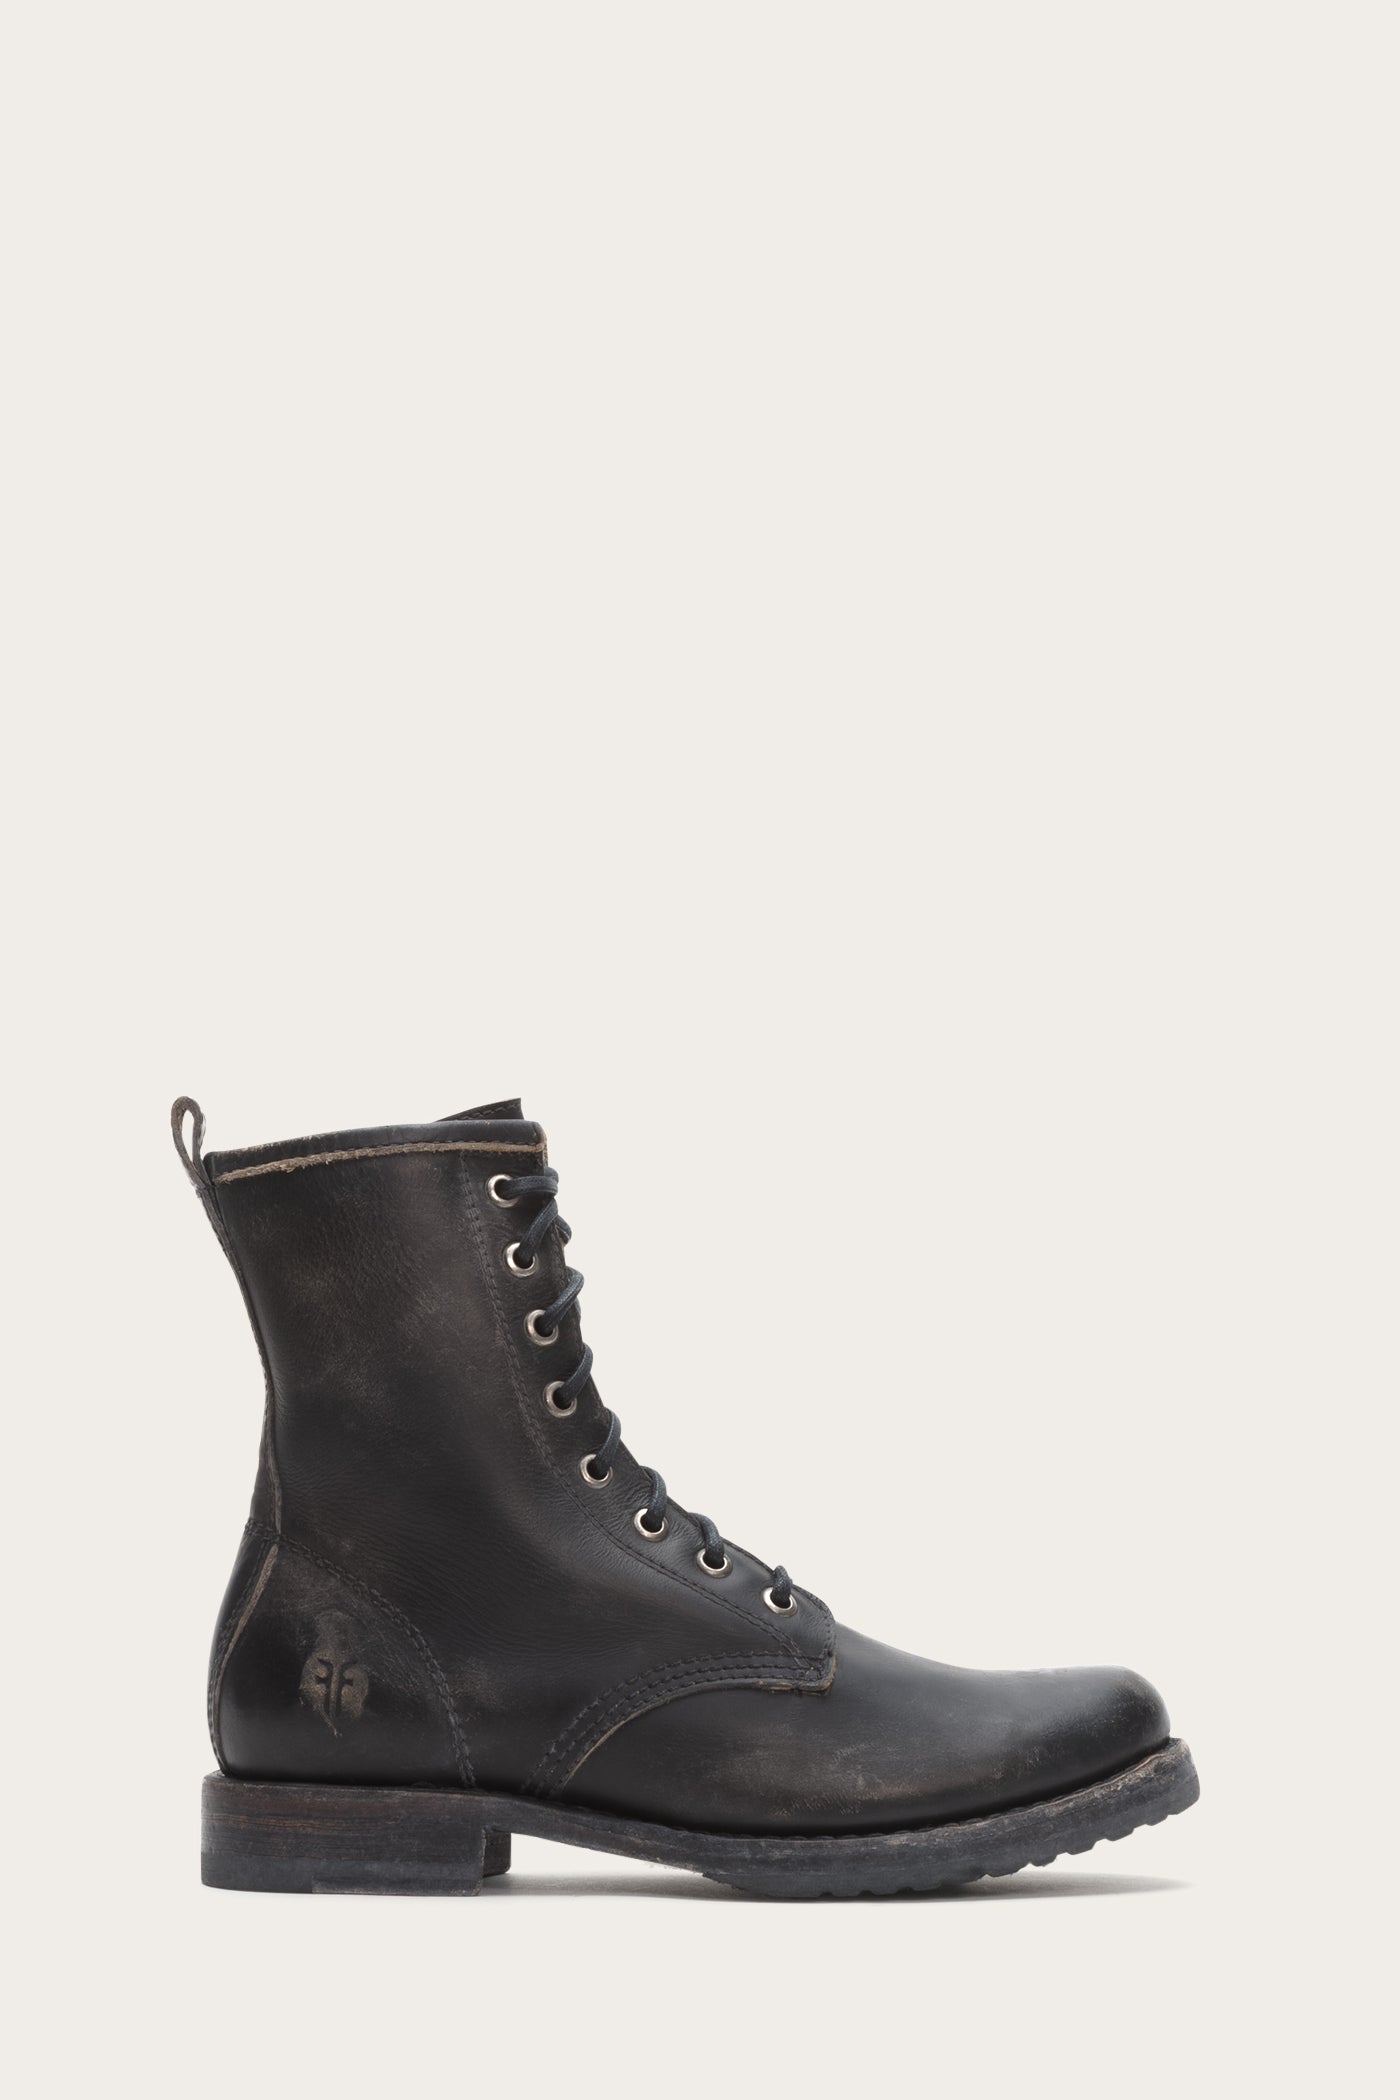 frye veronica lace up boots